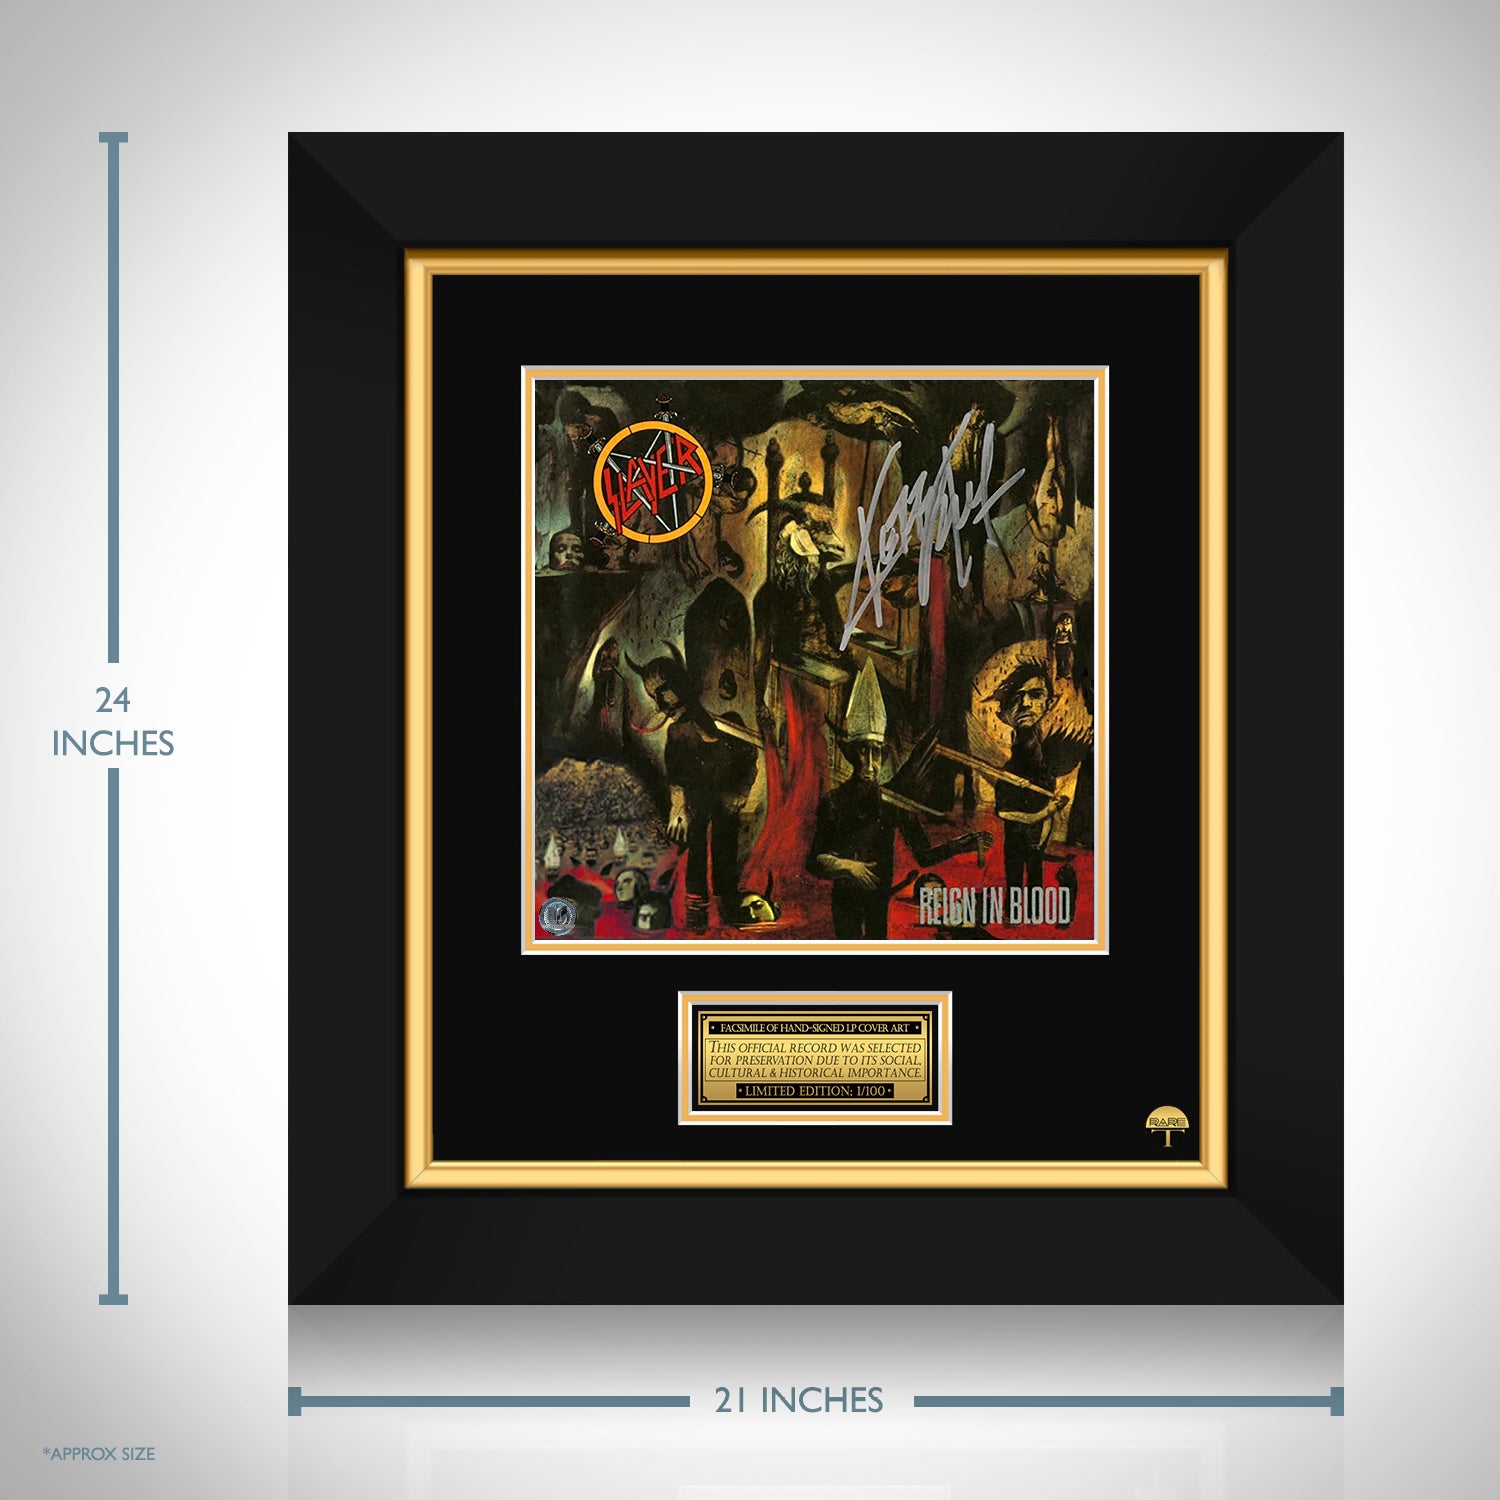 Slayer Reign In Blood LP Cover Limited Signature Edition Custom